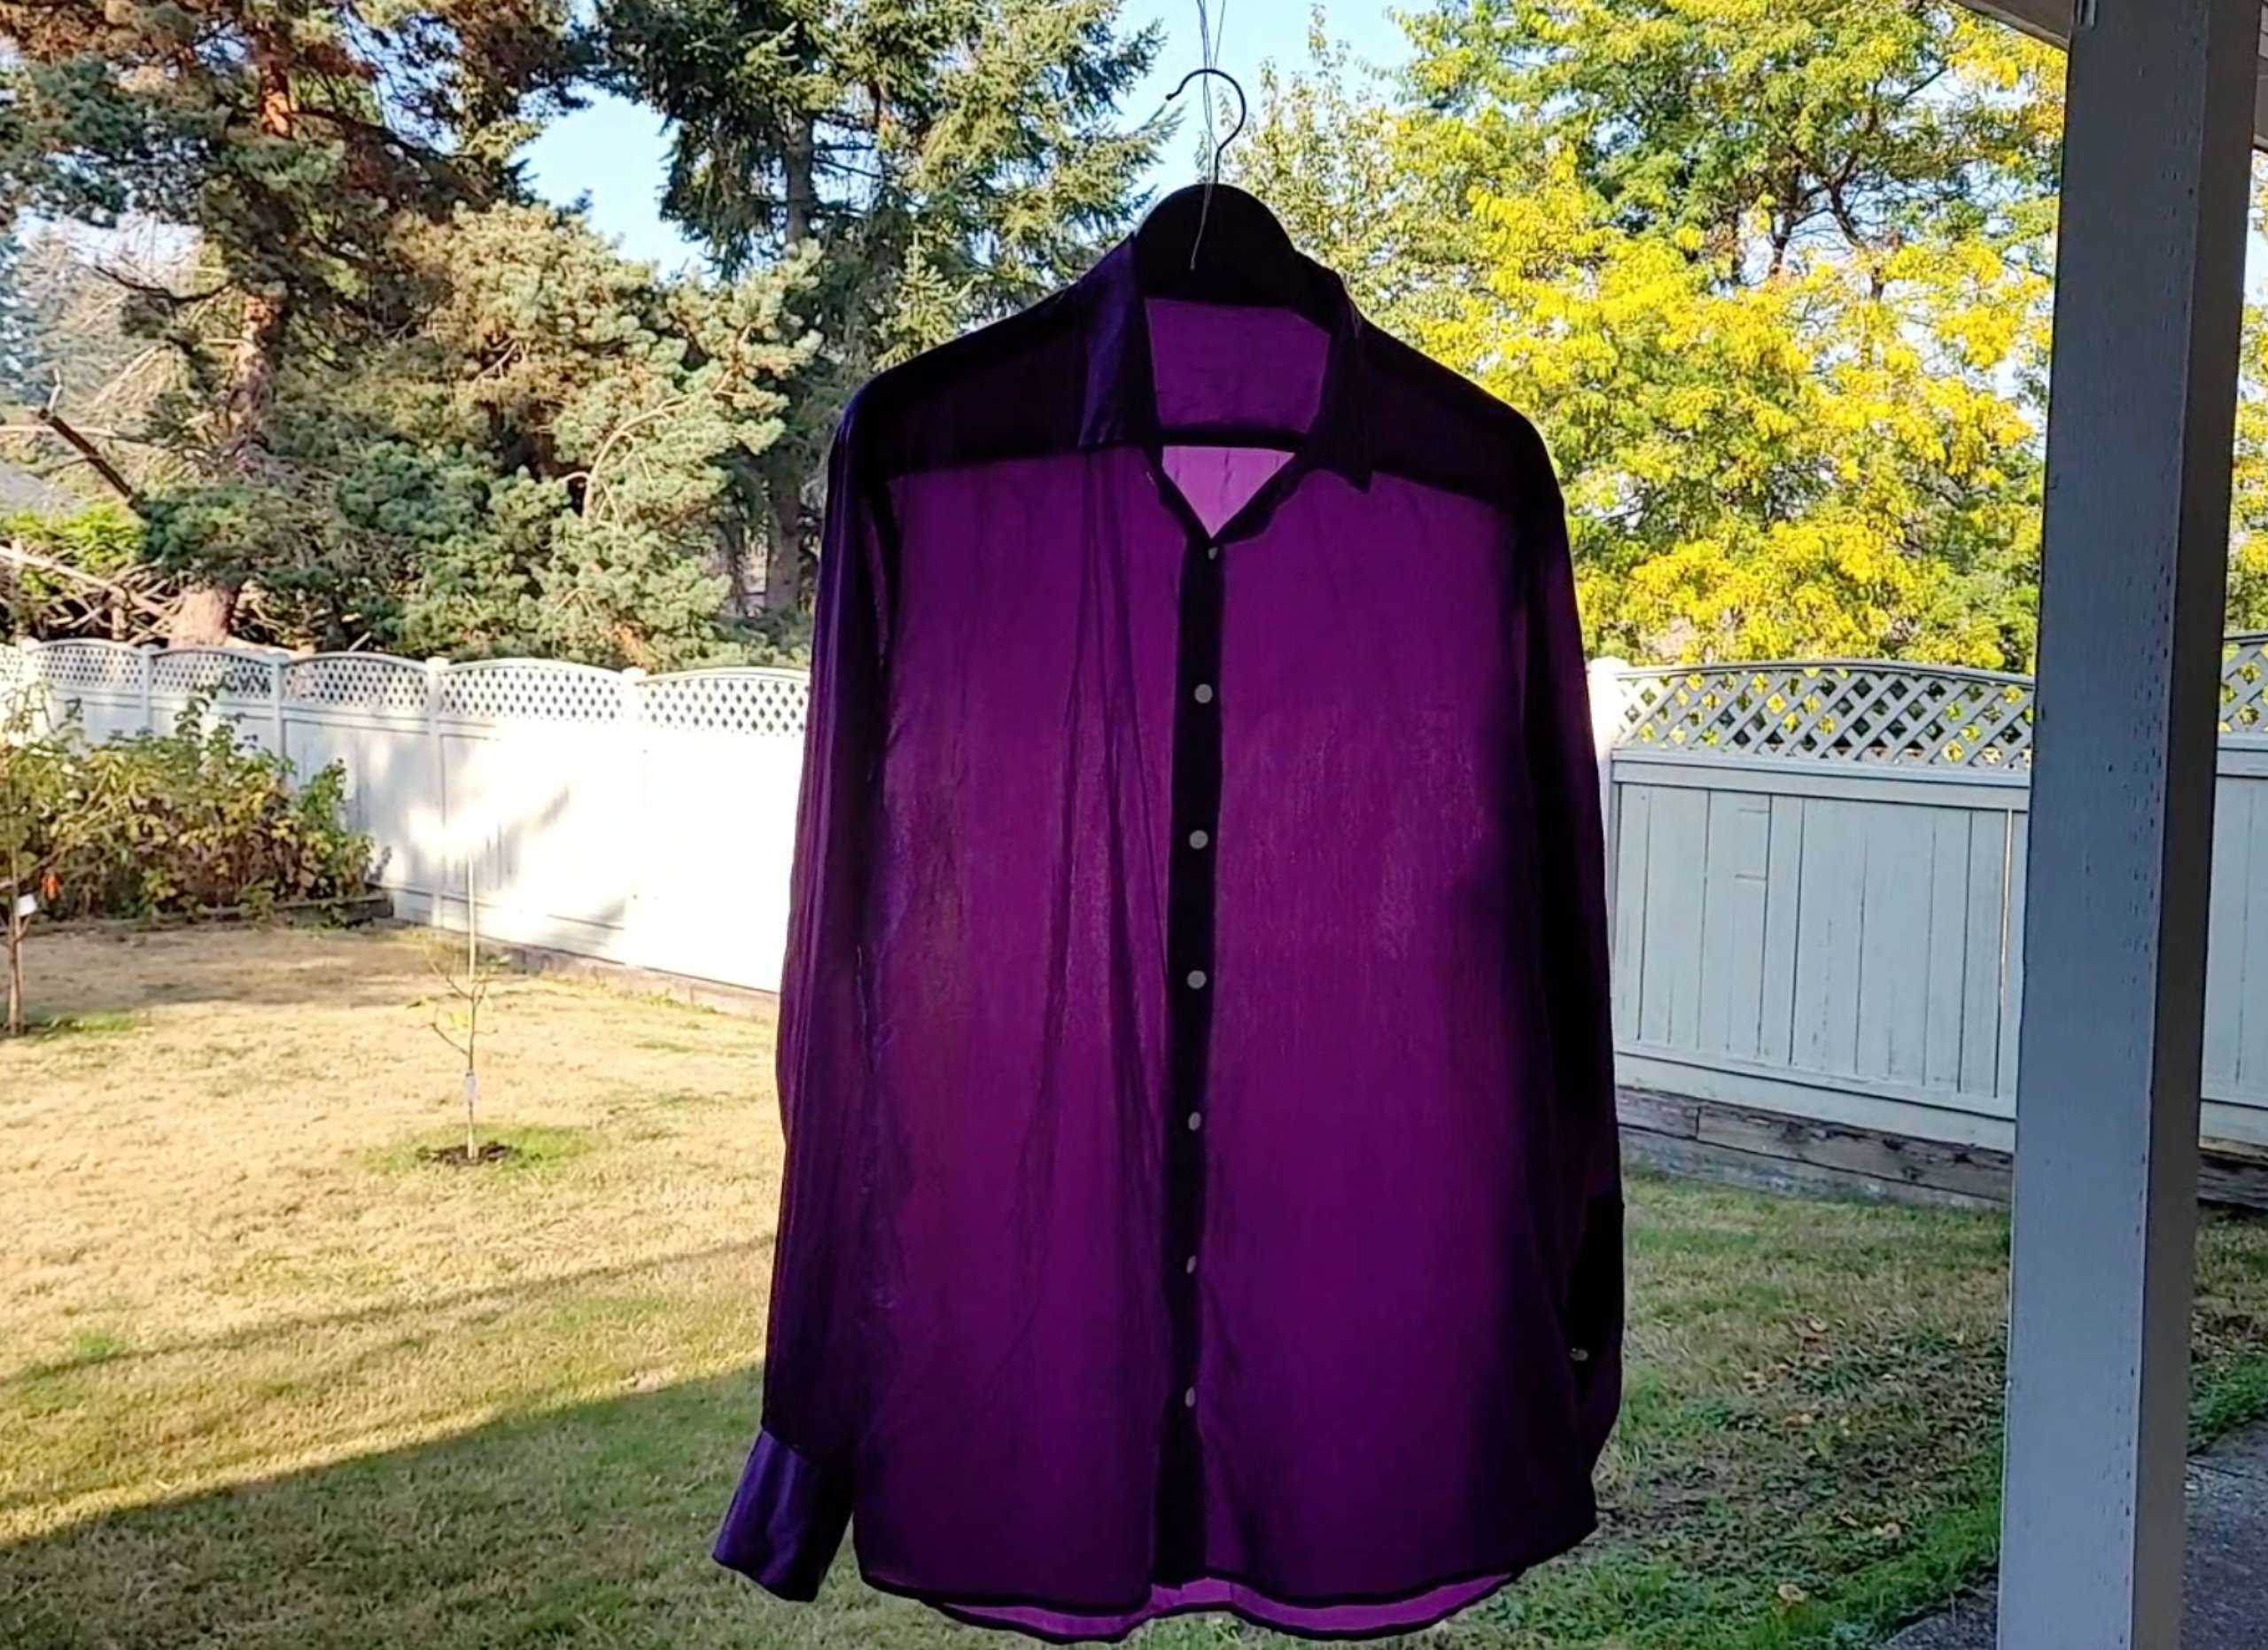 photo of a satin shirt air drying outside in the shade